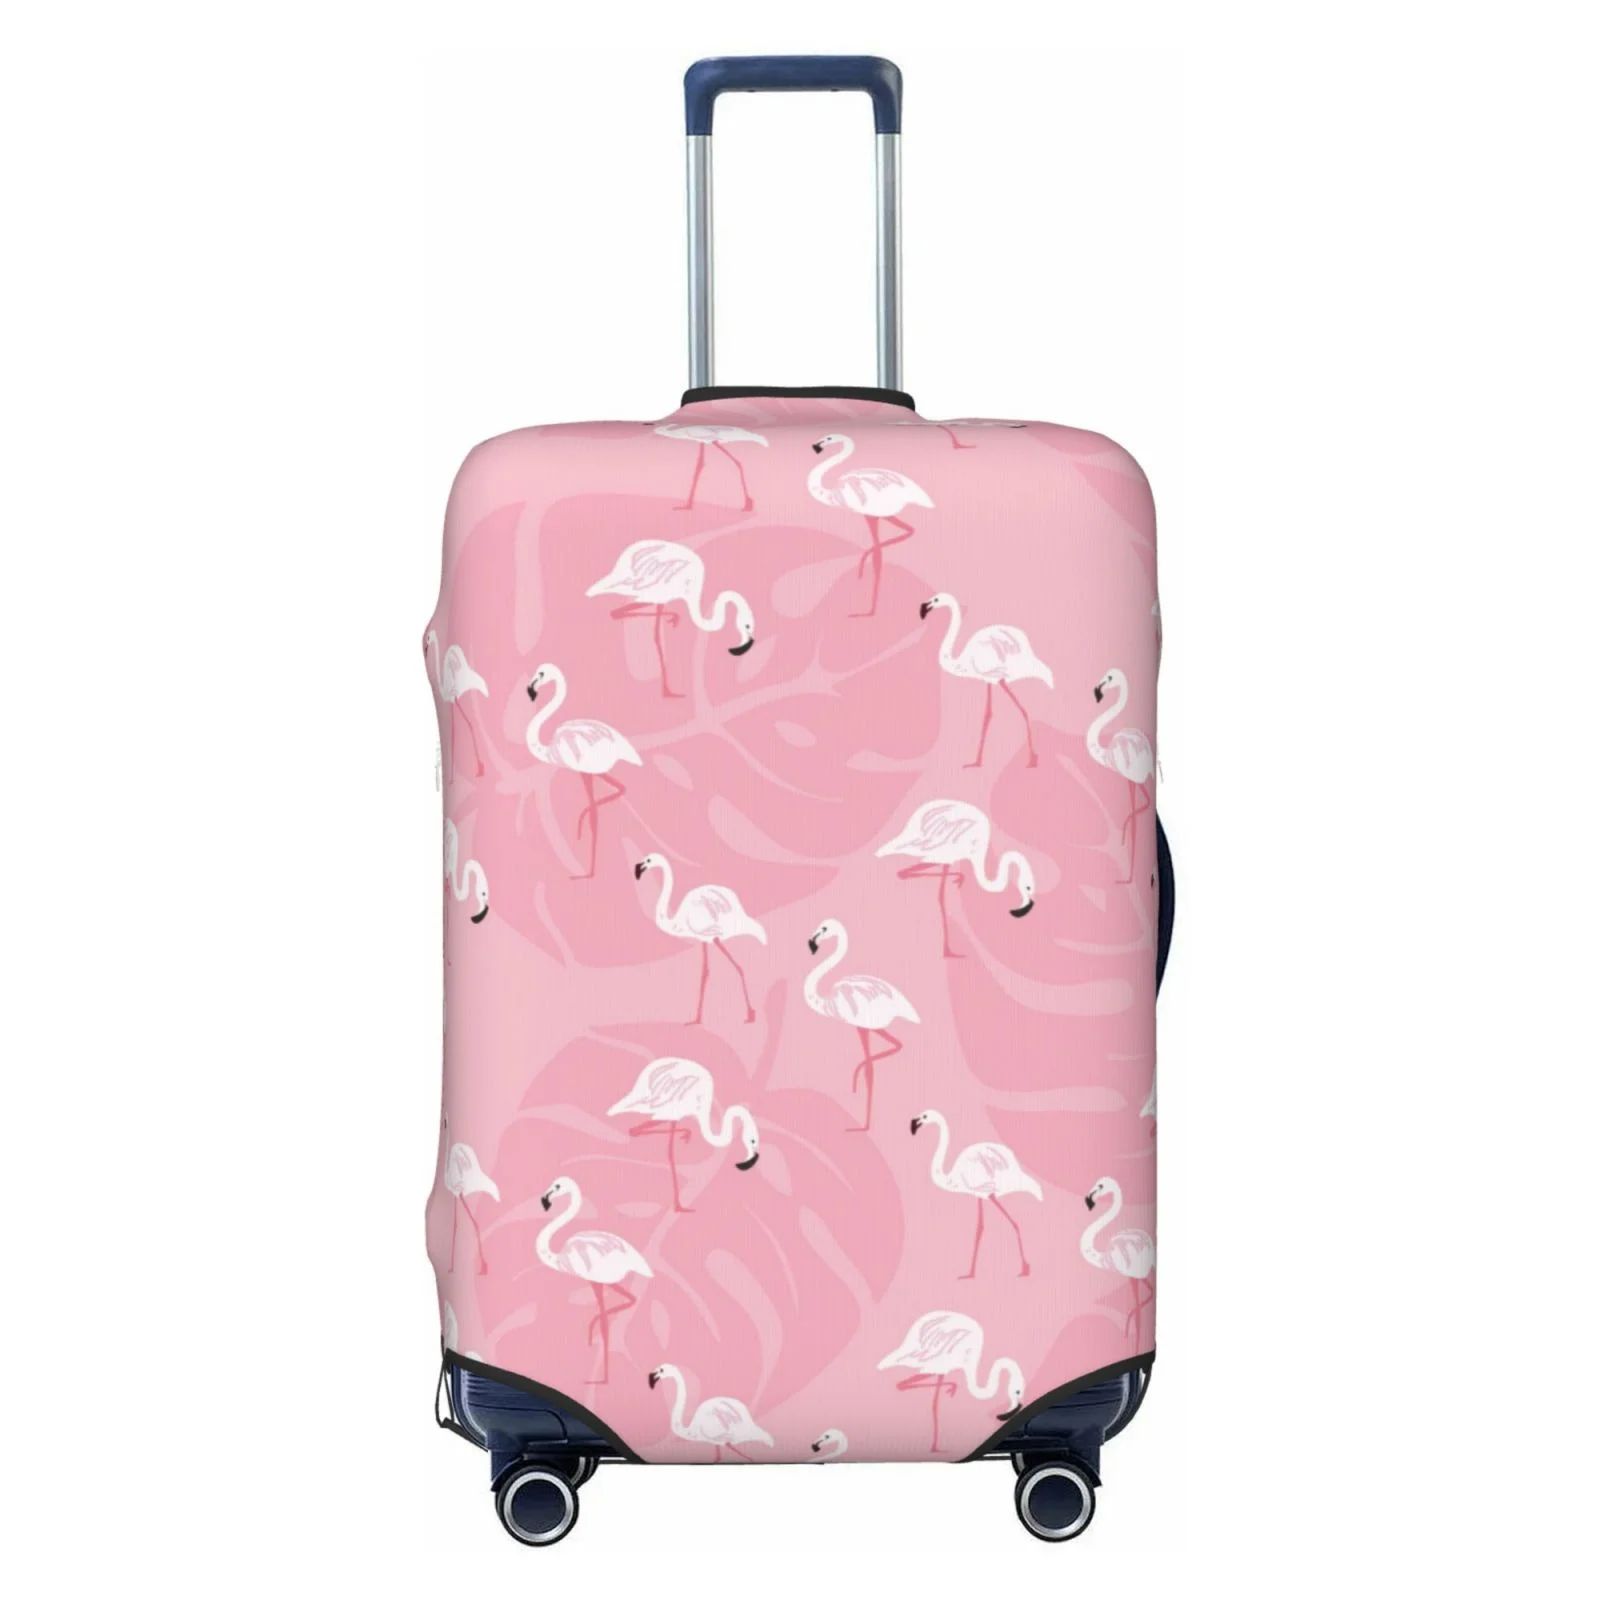 Junzan Pink Flamingos And Flowers Print Washable Luggage Cover - Fashion Suitcase Protector Fits ... | Walmart (US)